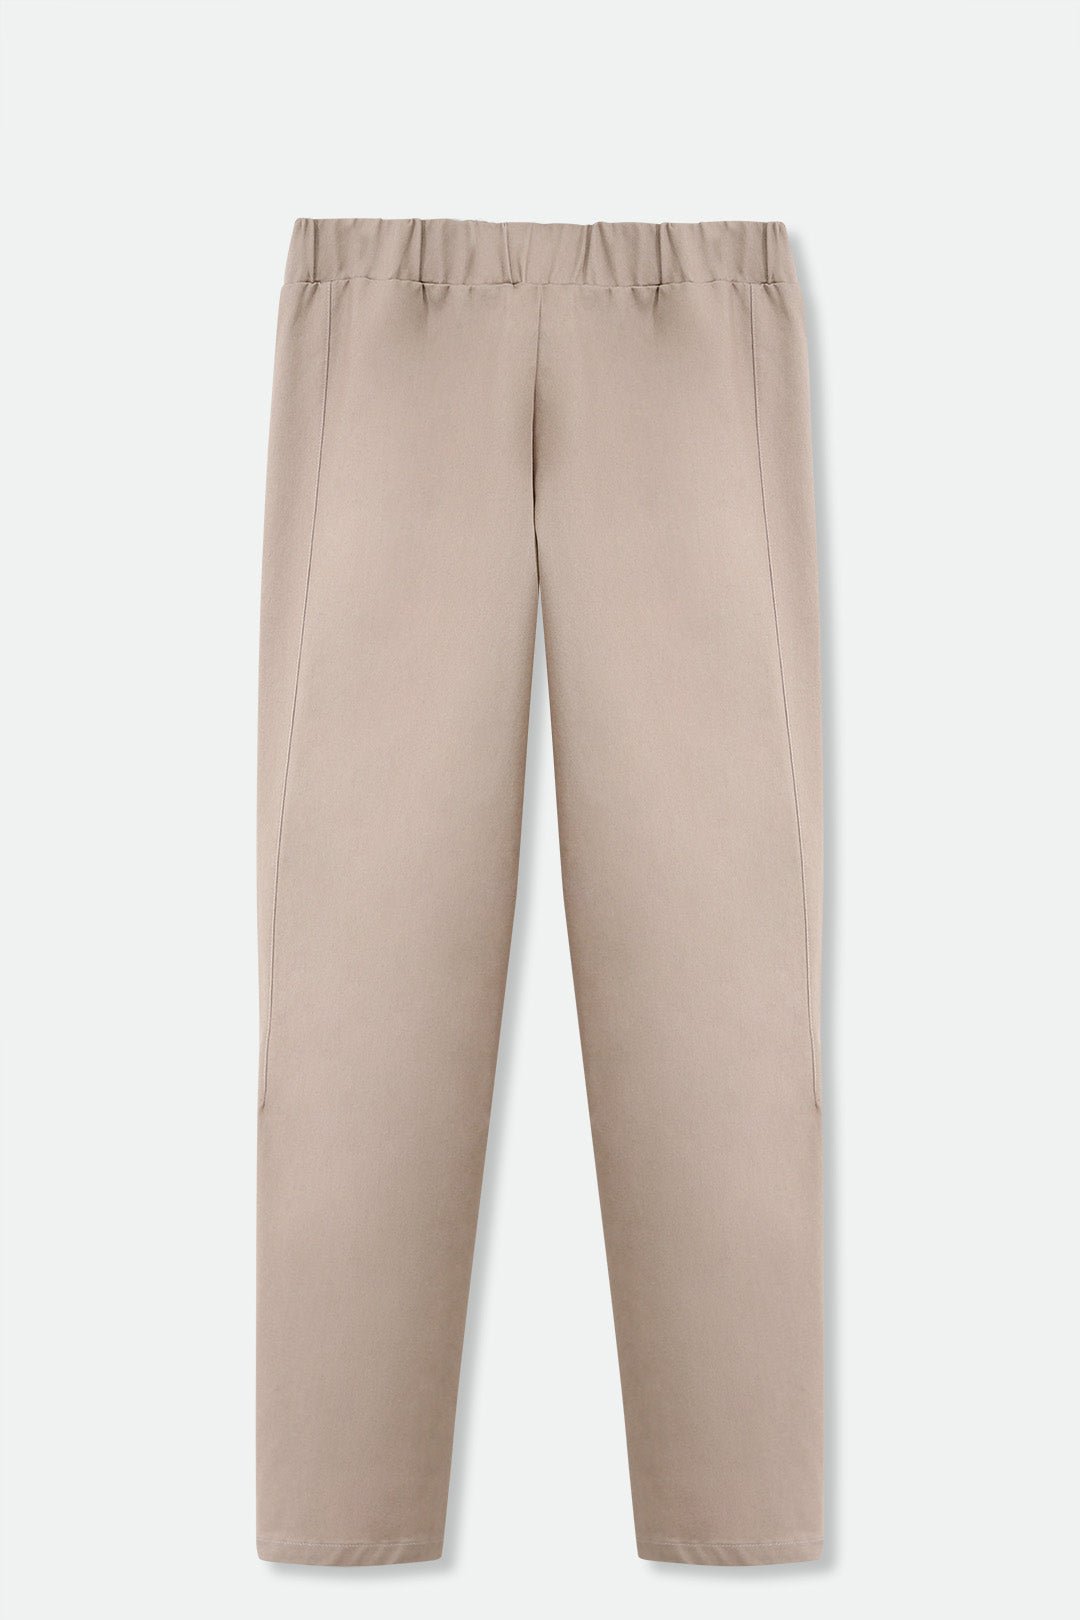 PERRYN PANT IN TECHNICAL COTTON STRETCH IN PINK BEIGE - Jarbo